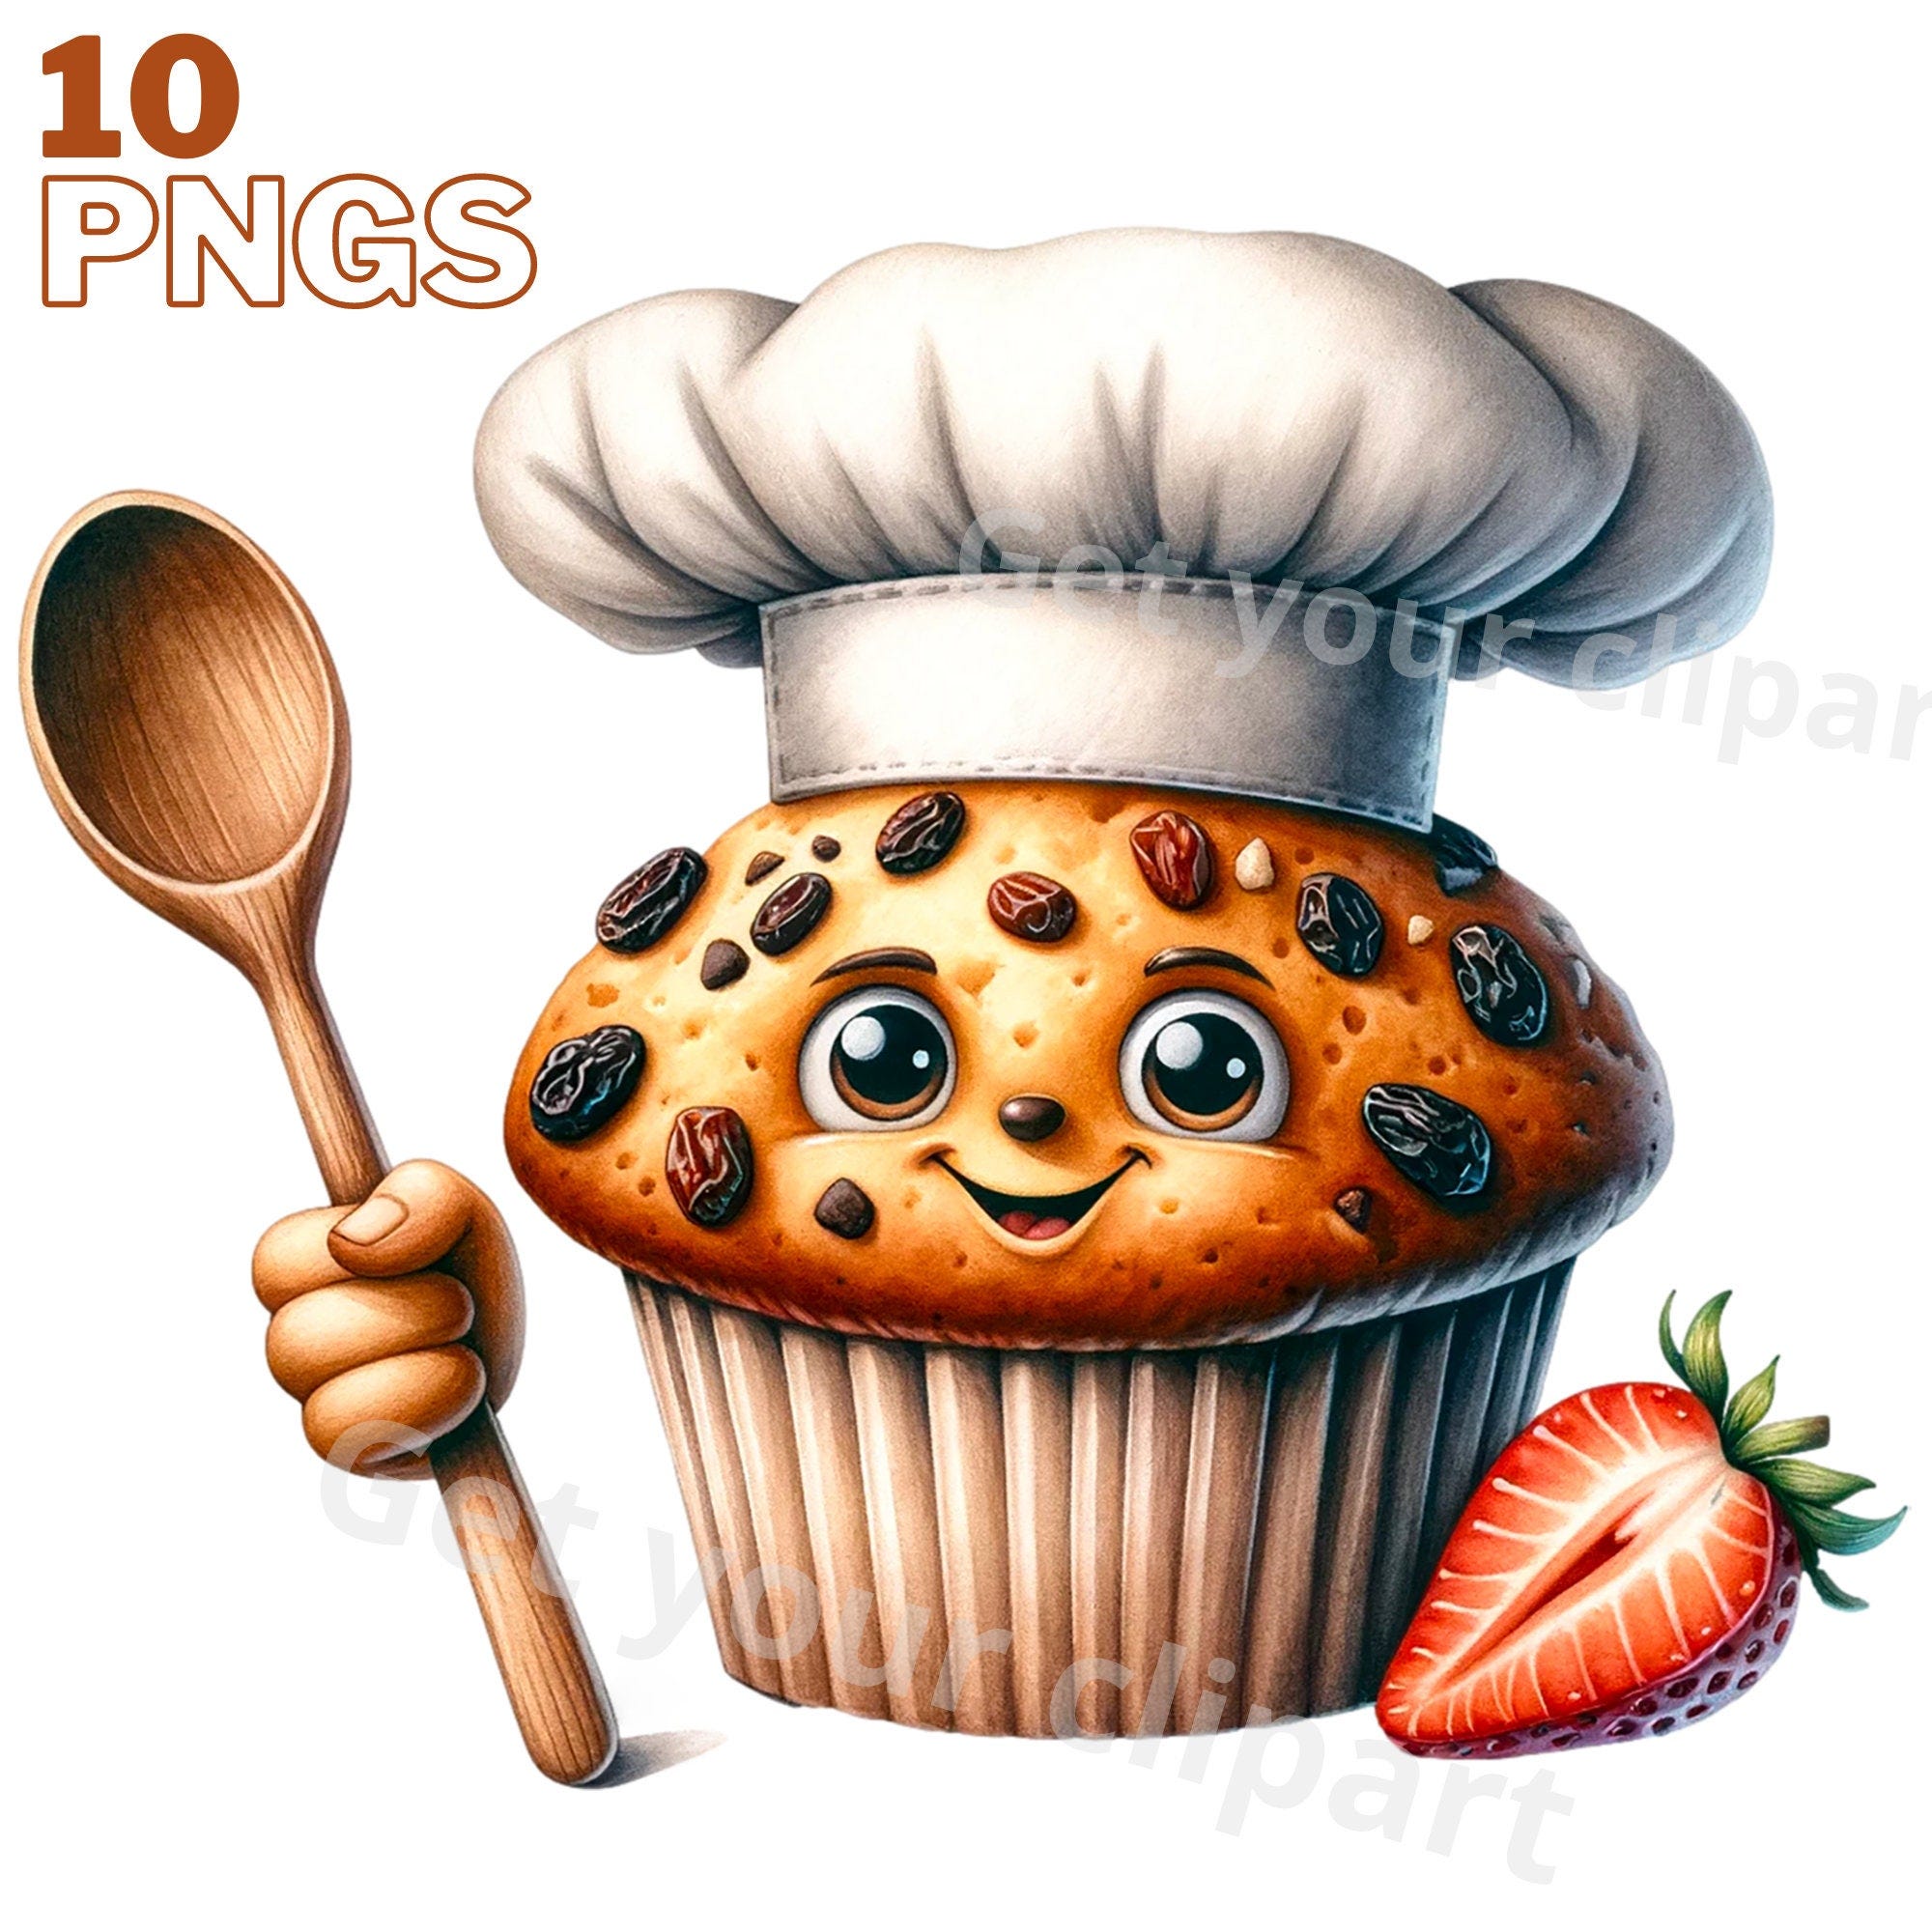 Funny muffin clipart bundle, Treats graphics, Sweet treats clipart bundle, Set of 10, With Commercial use